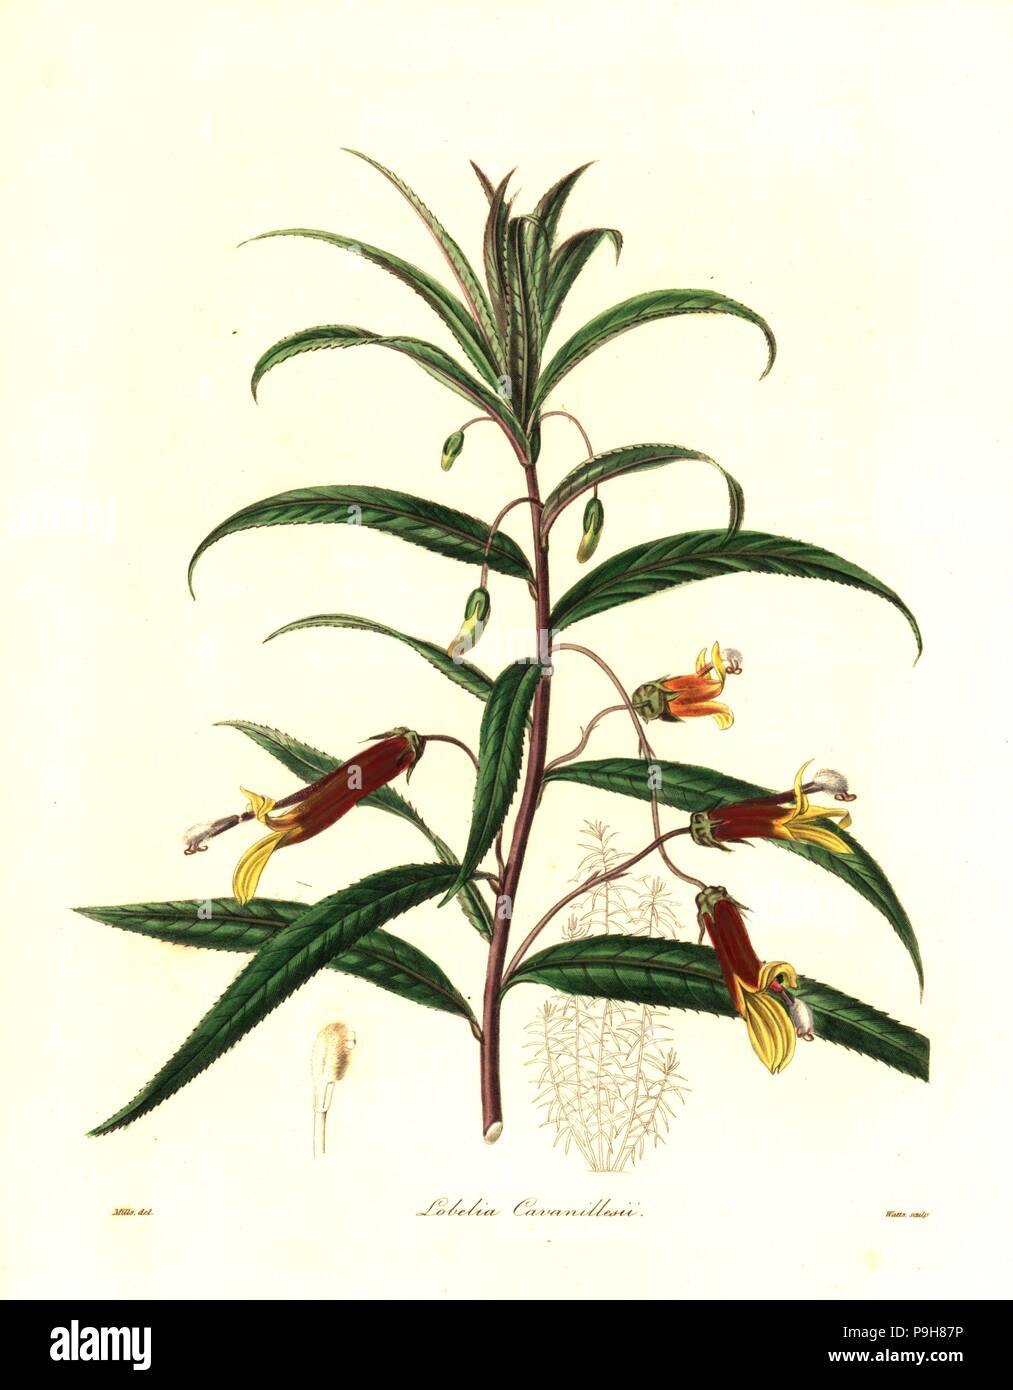 Mexican lobelia, Lobelia laxiflora (Cavanille's lobelia, Lobelia cavanillesii). Handcoloured copperplate engraving by Watts after a botanical illustration by MIlls from Benjamin Maund and the Rev. John Stevens Henslow's The Botanist, London, 1836. Stock Photo